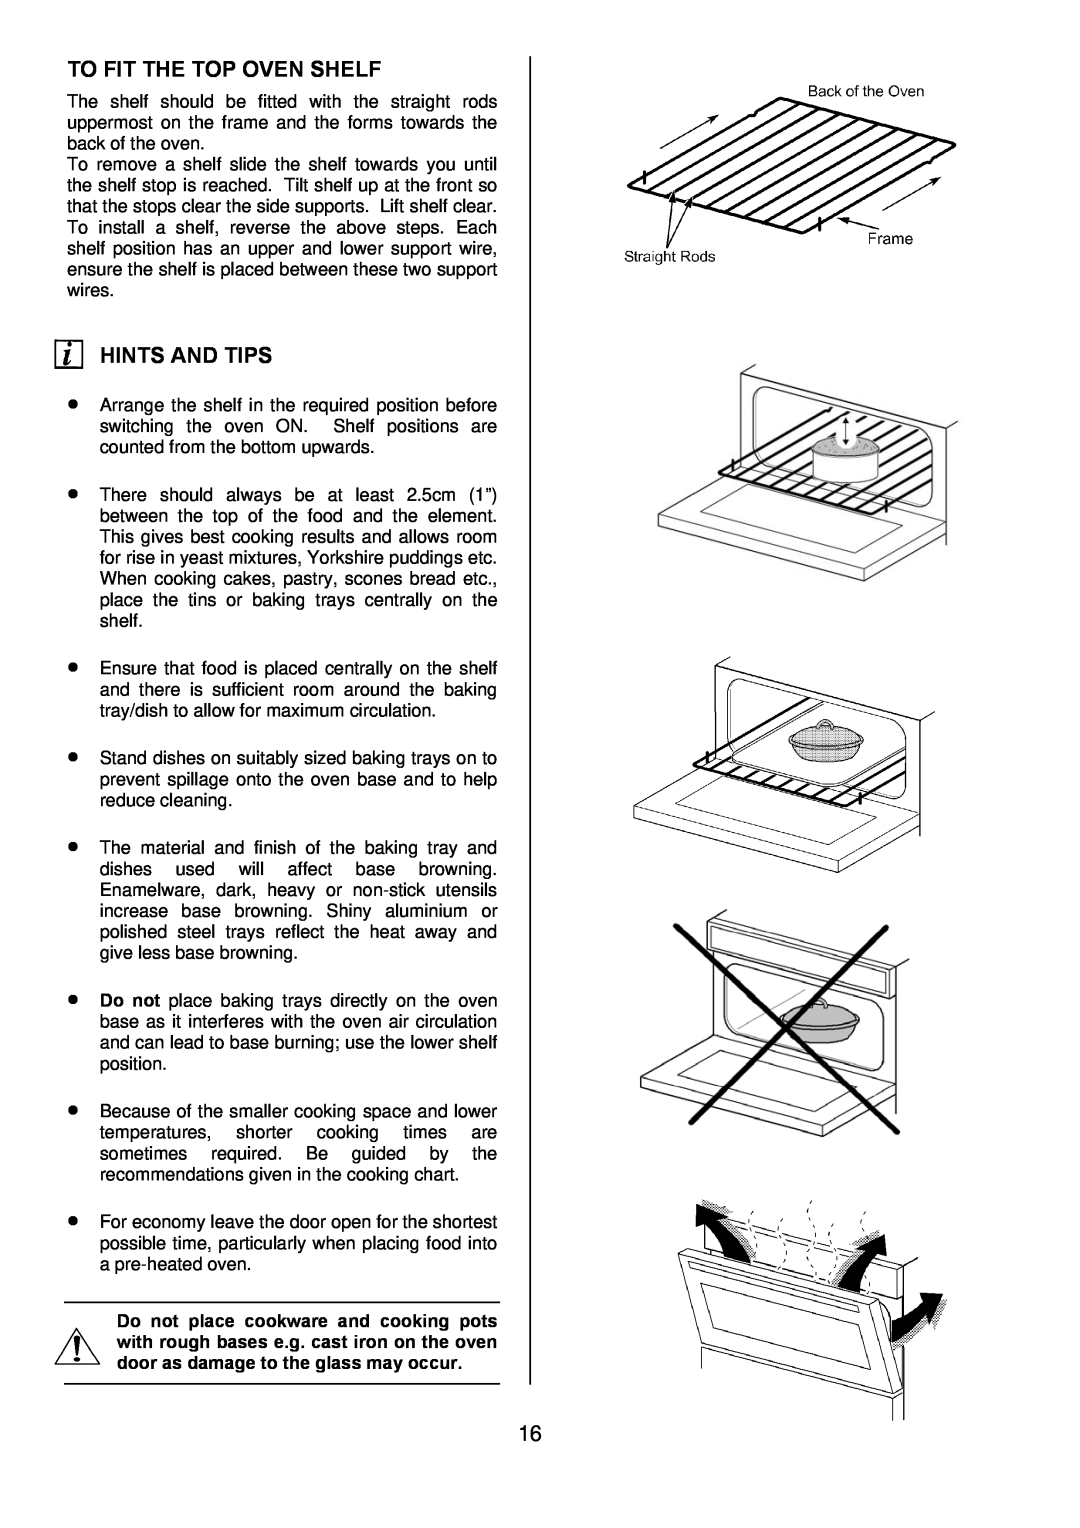 Zanussi ZOD 685 manual To Fit The Top Oven Shelf, Hints And Tips 